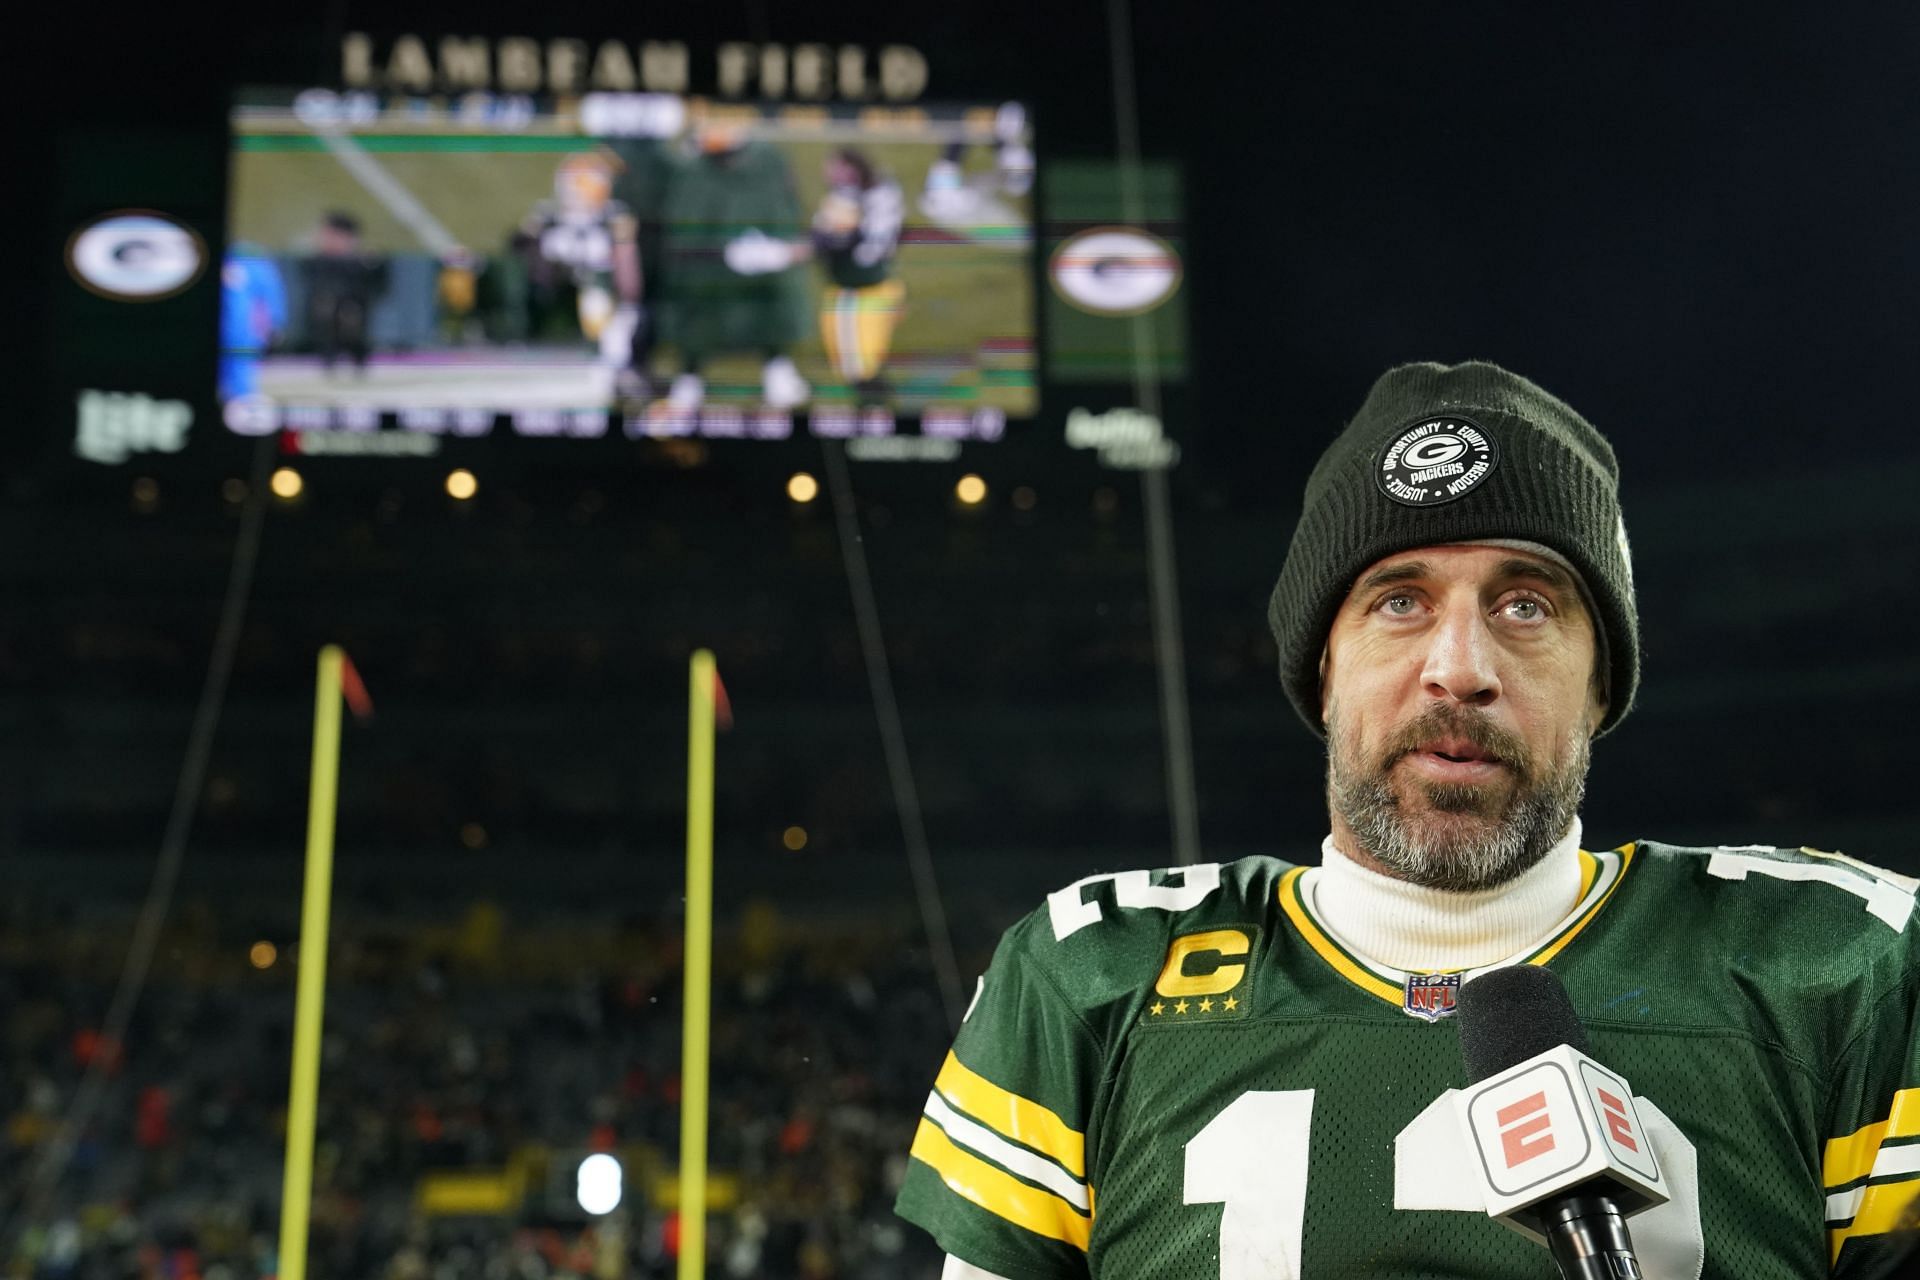 Aaron Rodgers’ trade value took a hit after subpar 2022 season, claims ex-NFL agent